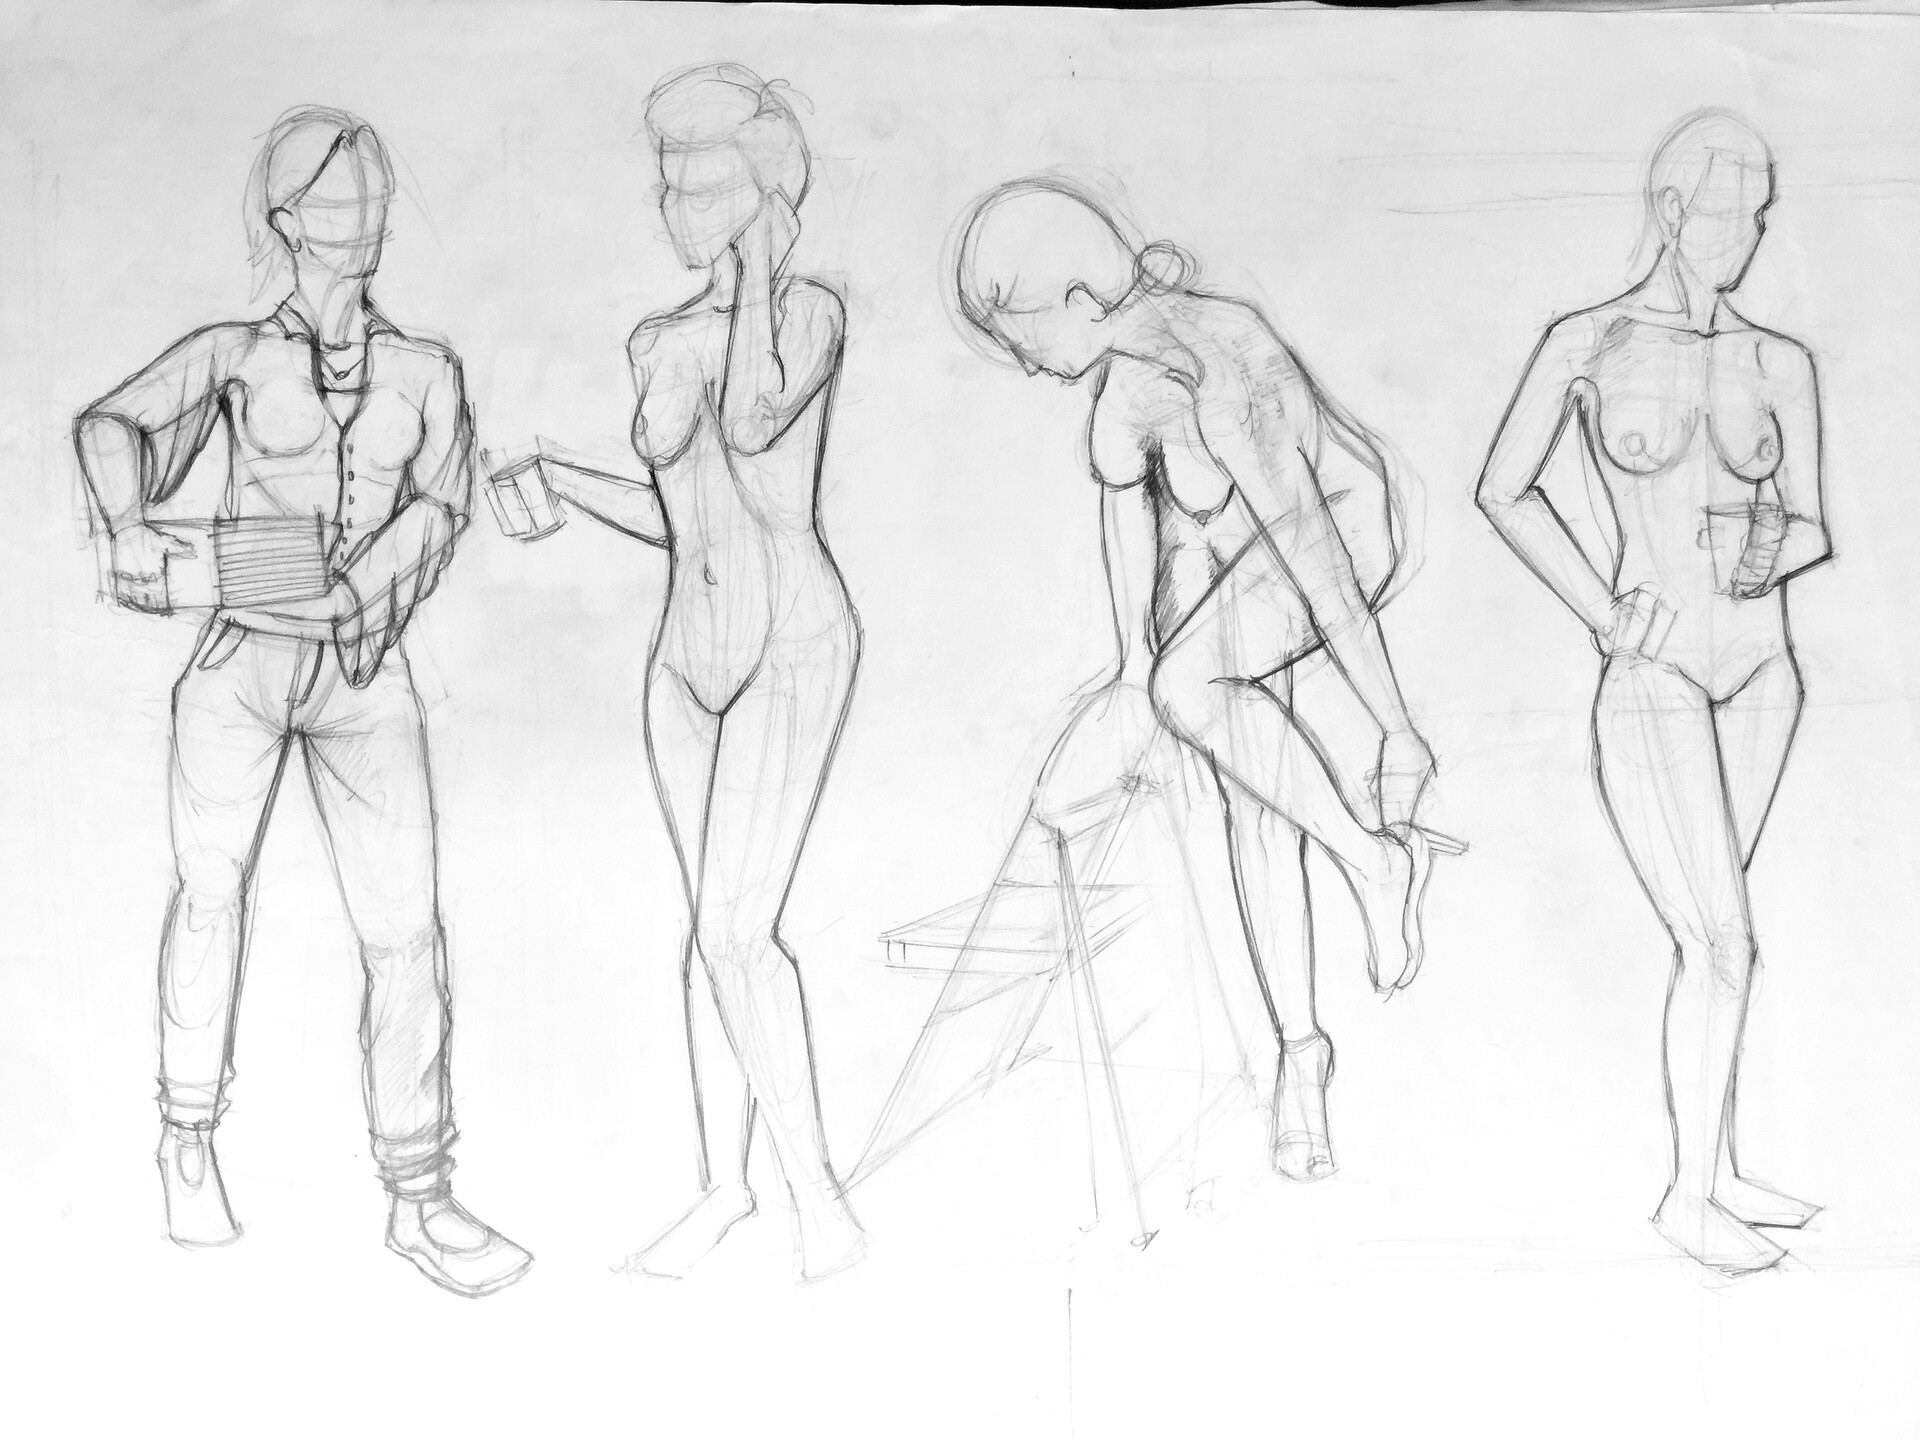 Explained Human Figure Drawings And Sketches Male And Female Both   HERCOTTAGE  Human figure drawing Figure drawing Human figure sketches